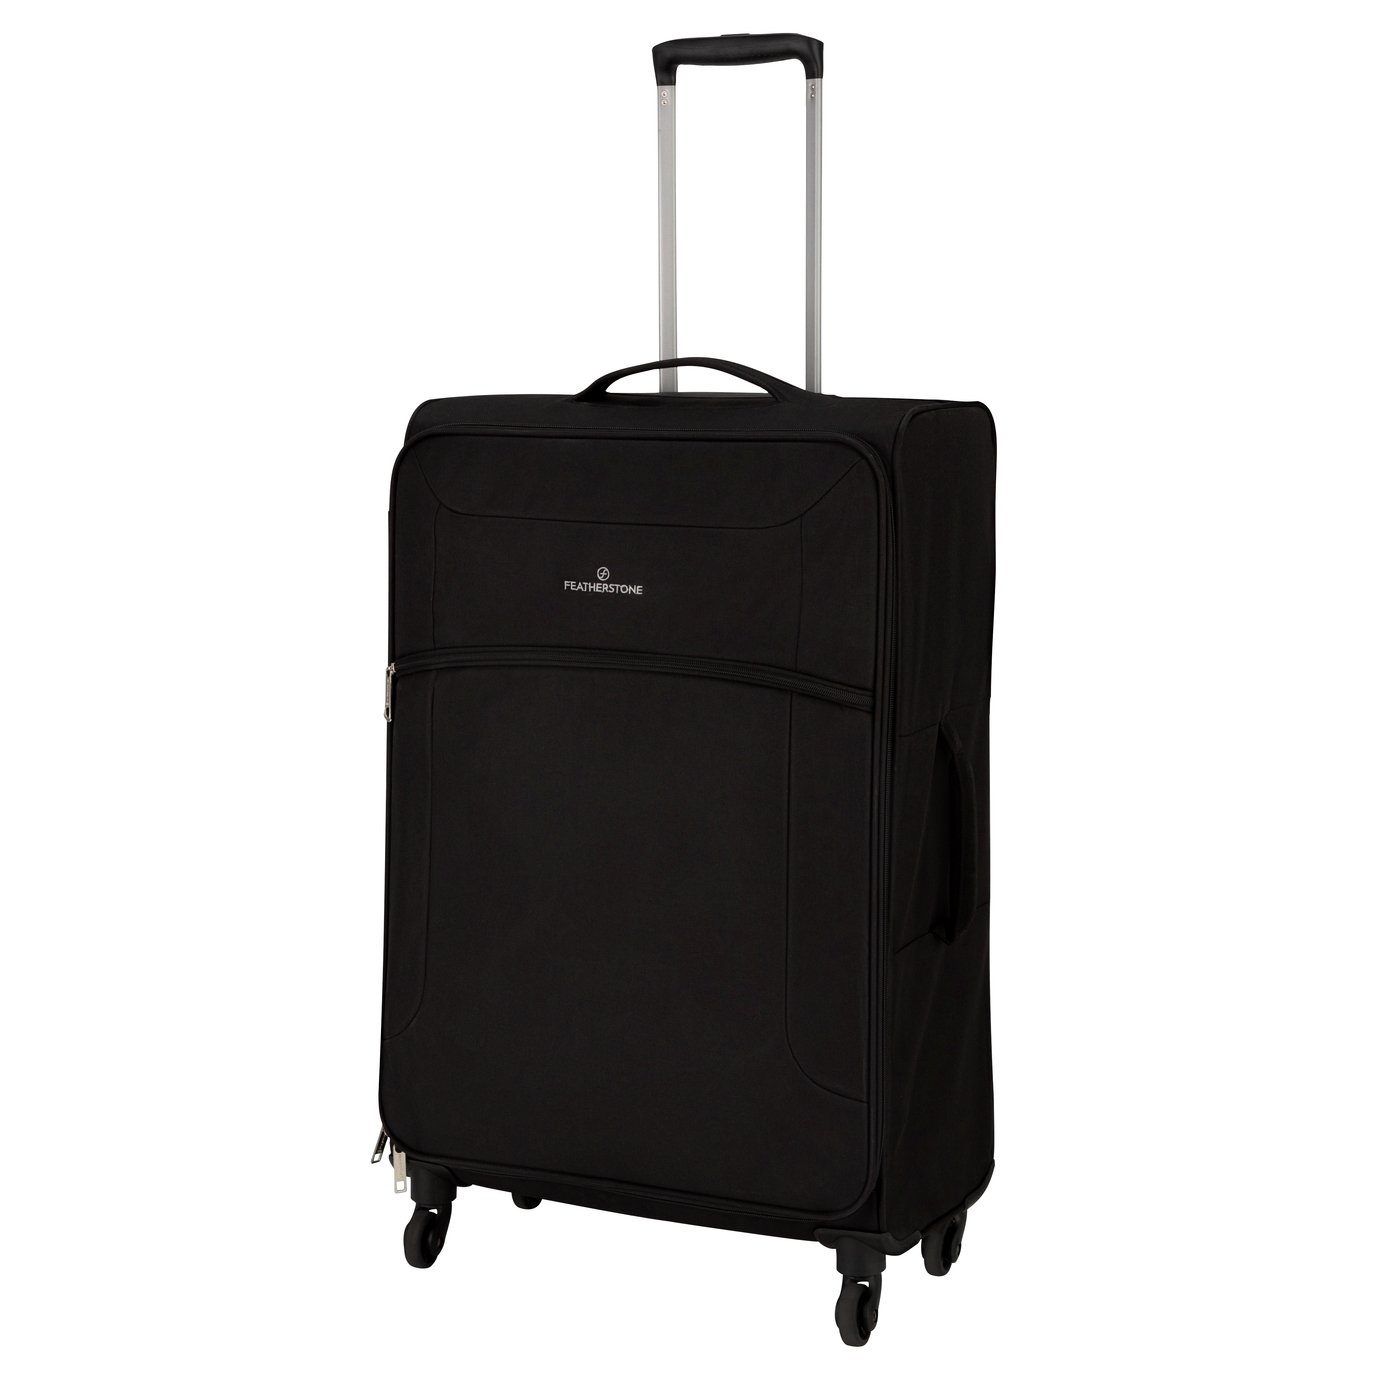 | Argos | Bags Luggage and Travel/Suitcases